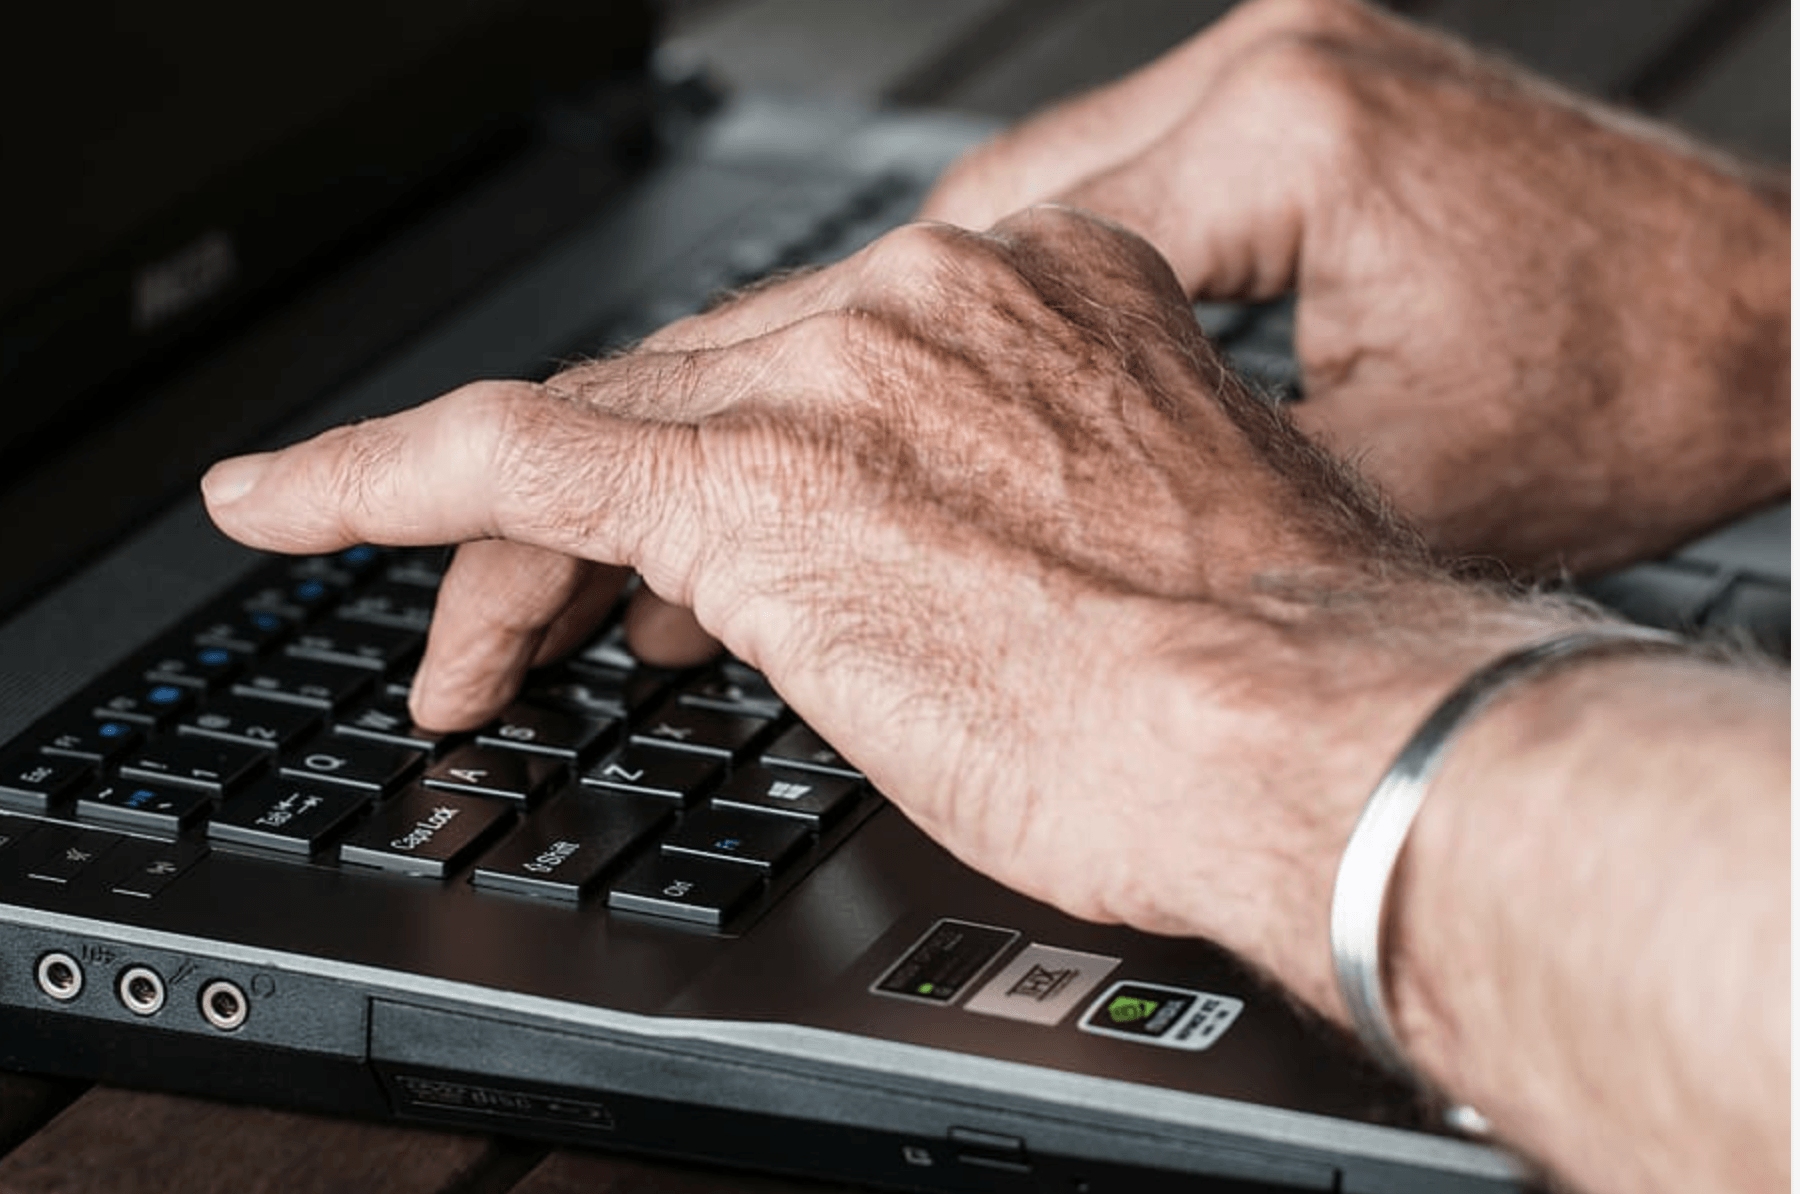 Hands of a senior typing on a computer